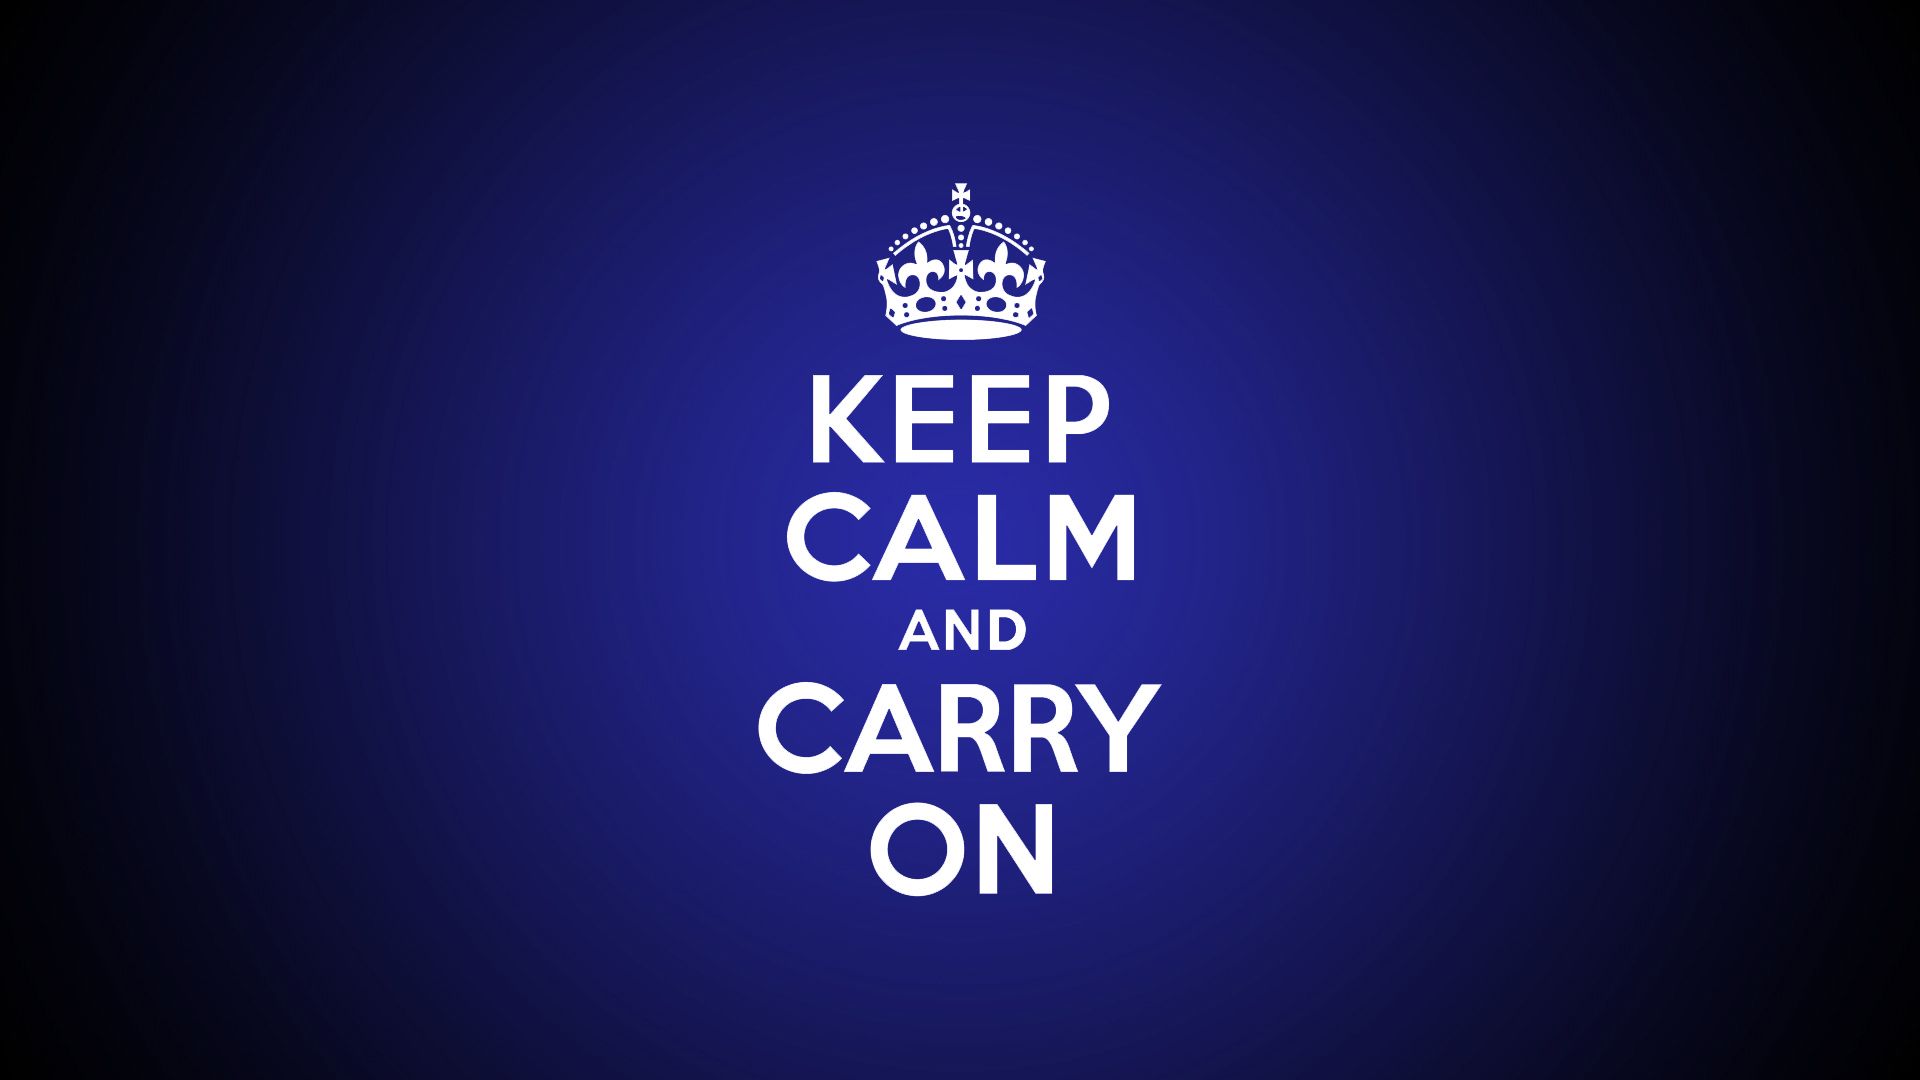 Keep Calm And Carry On Original - wallpaper.